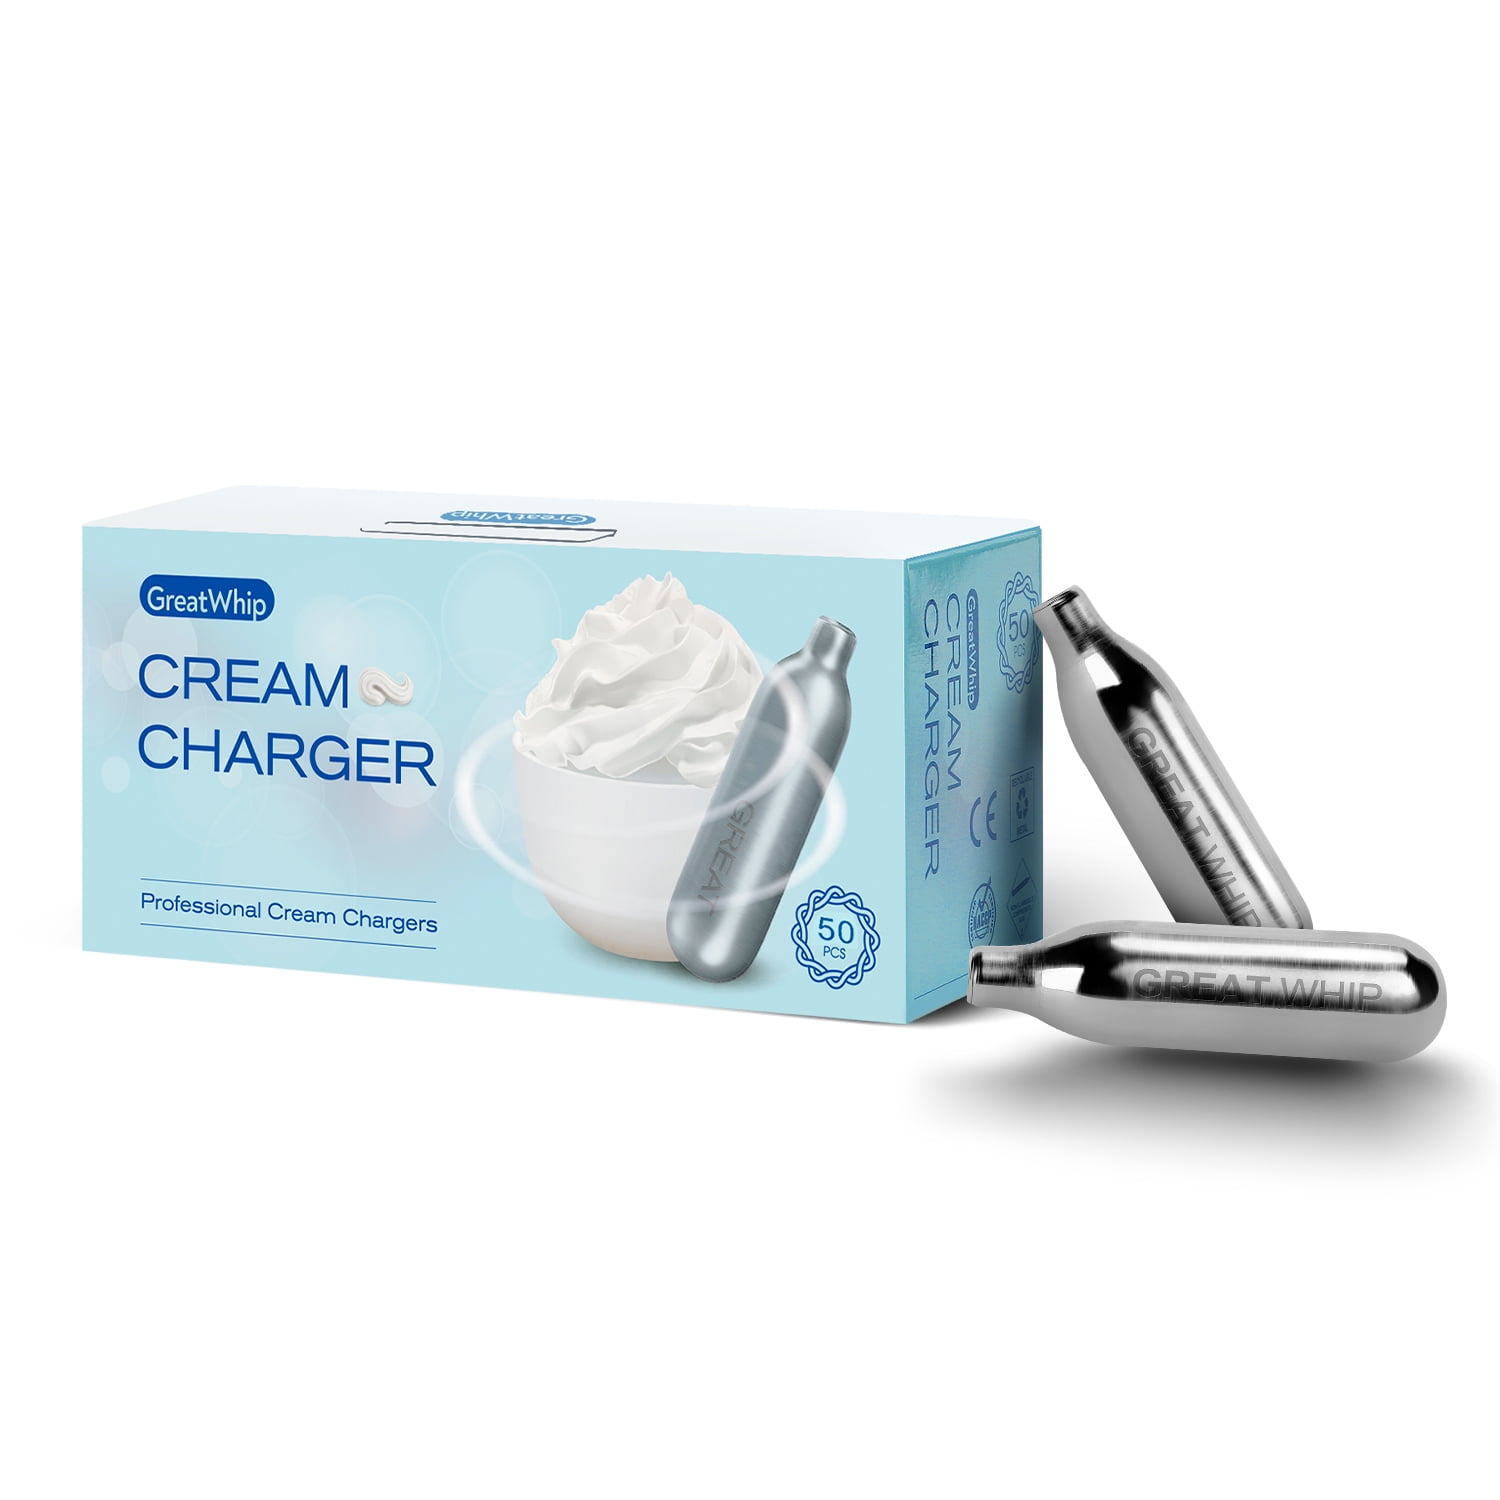 SupremeWhipMax Whipped Cream Chargers - Pure N2O Whipped Cream